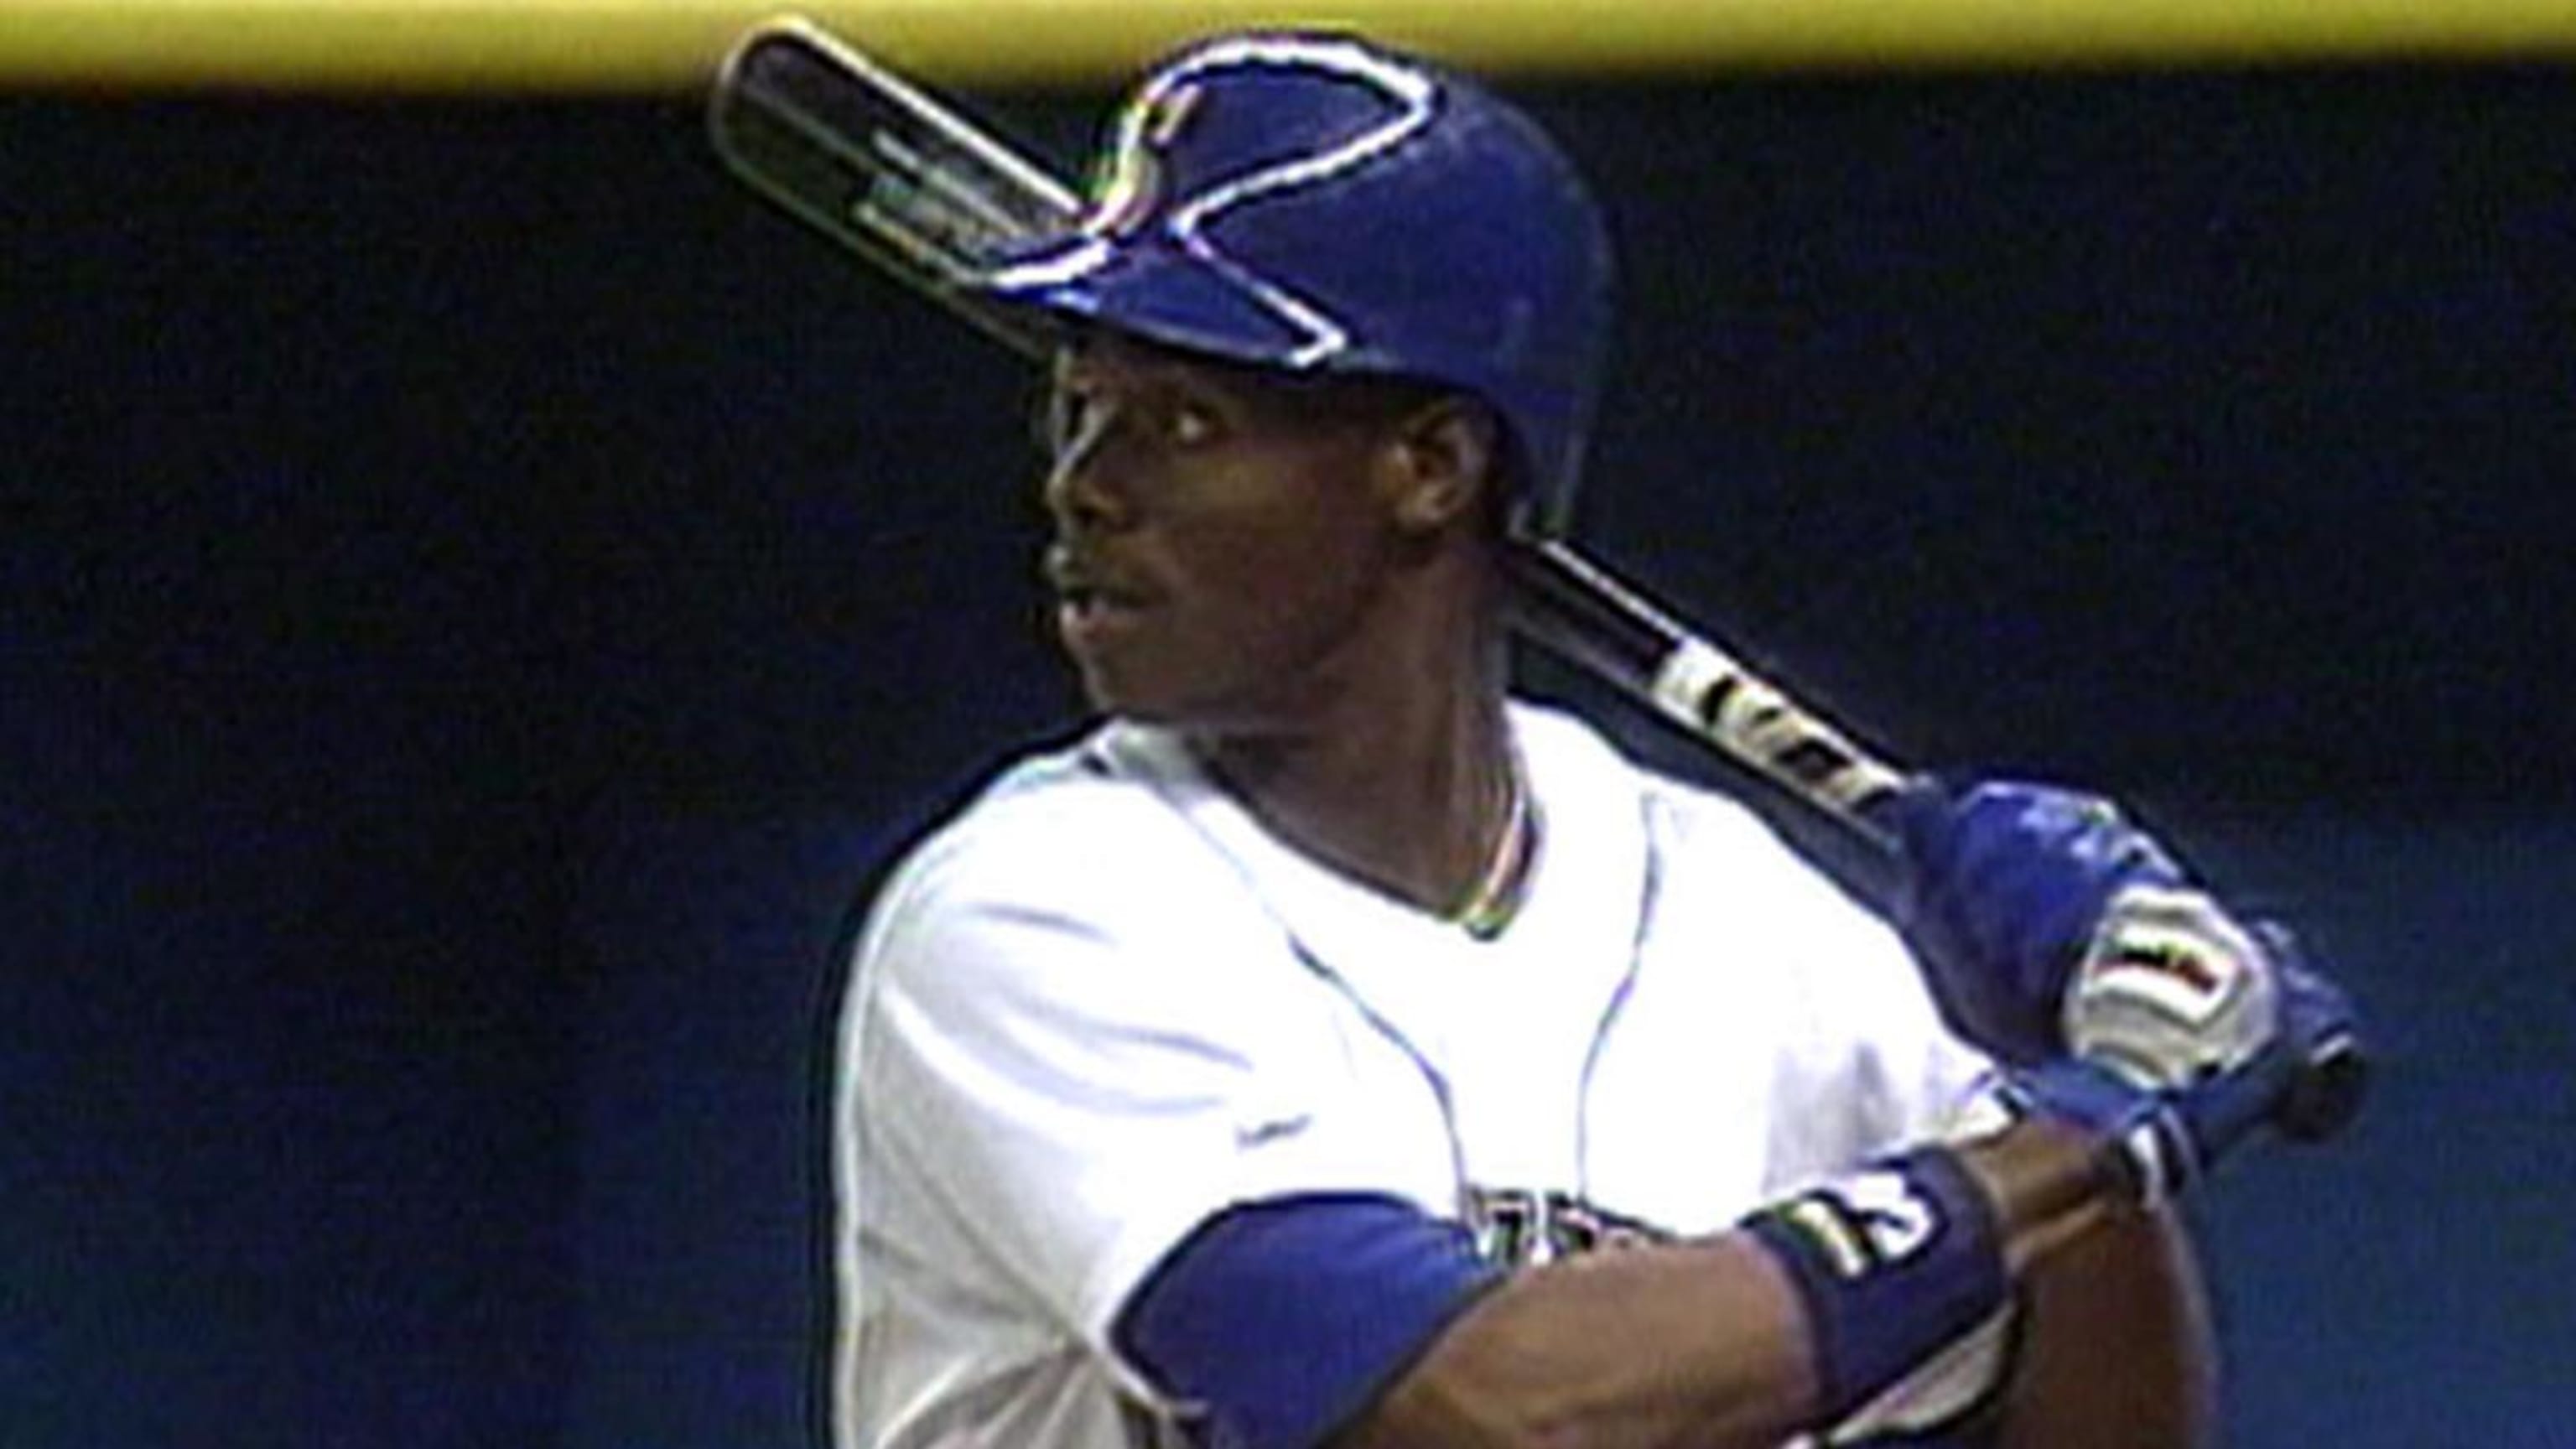 Ken Griffey Jr. hit his first homer on the first pitch he saw at